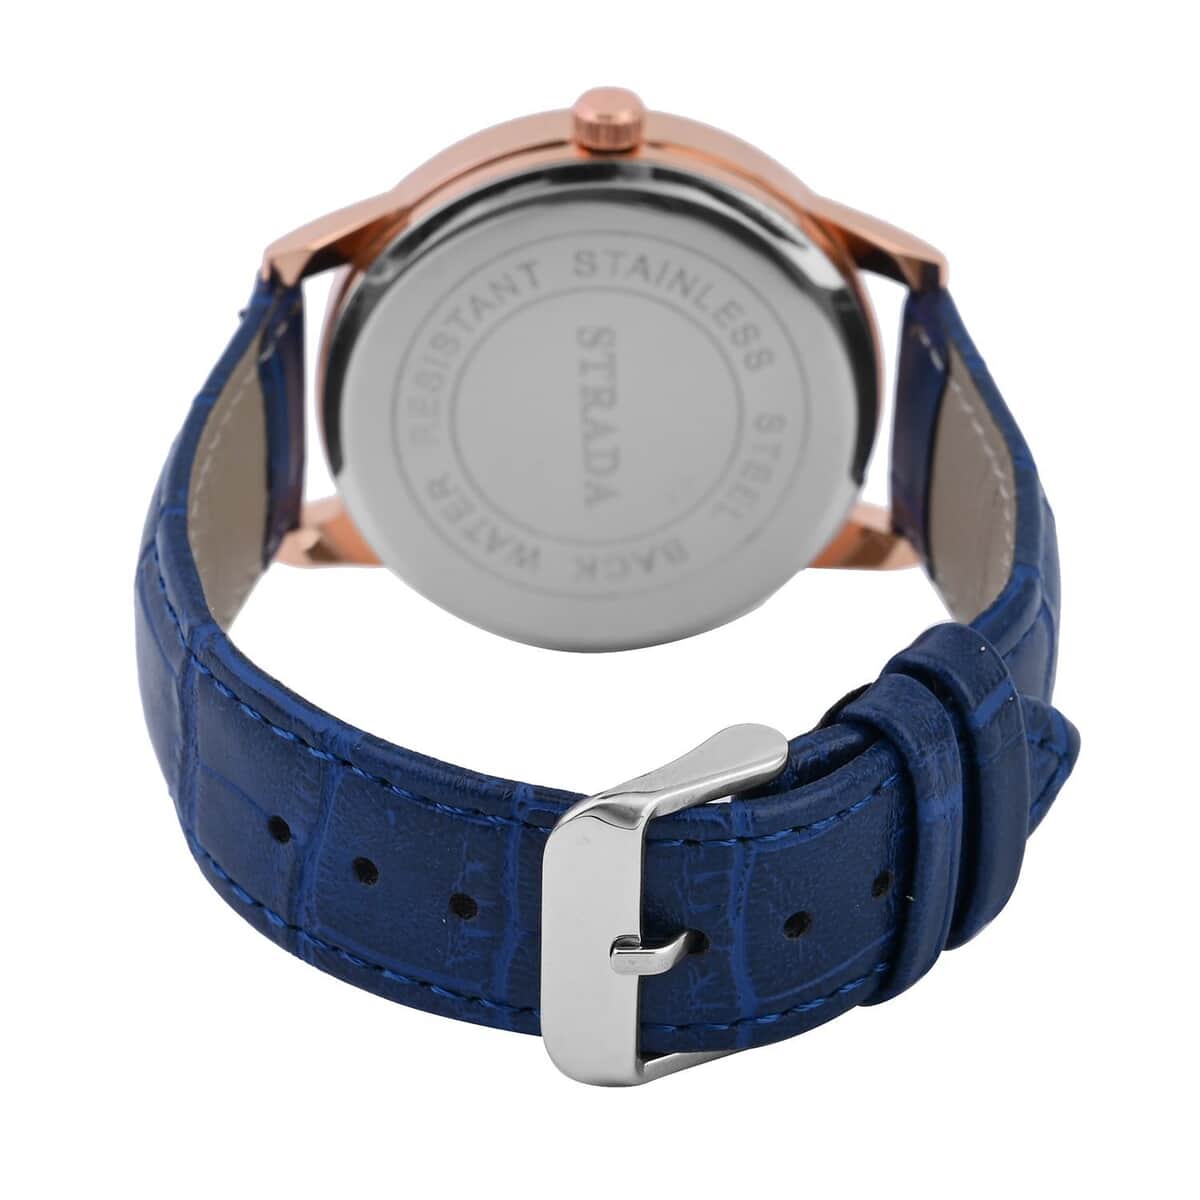 Strada Japanese Movement Watch in Rosetone with Blue Faux Leather Strap (40.65mm) (5.75-7.75 Inches) image number 5